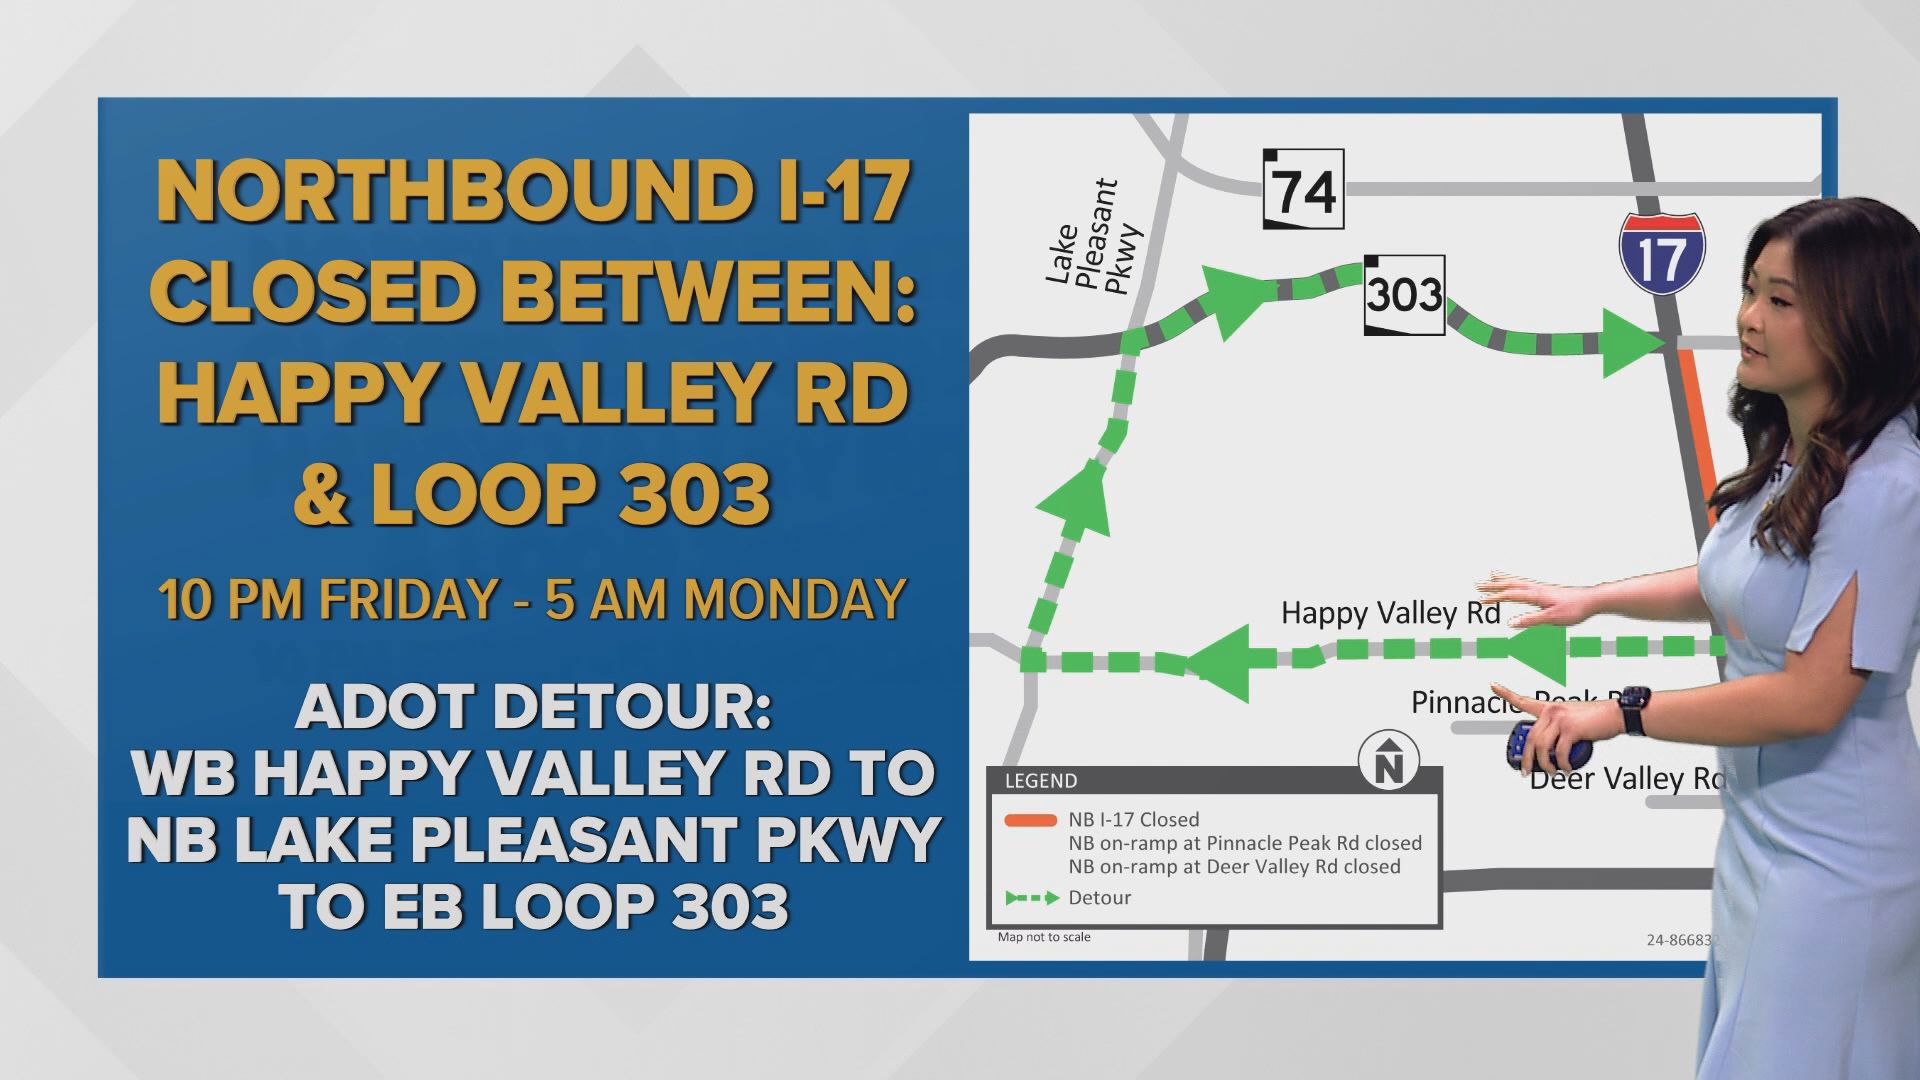 Here's a breakdown of all the closures and detours on Valley roads for June 7 weekend.